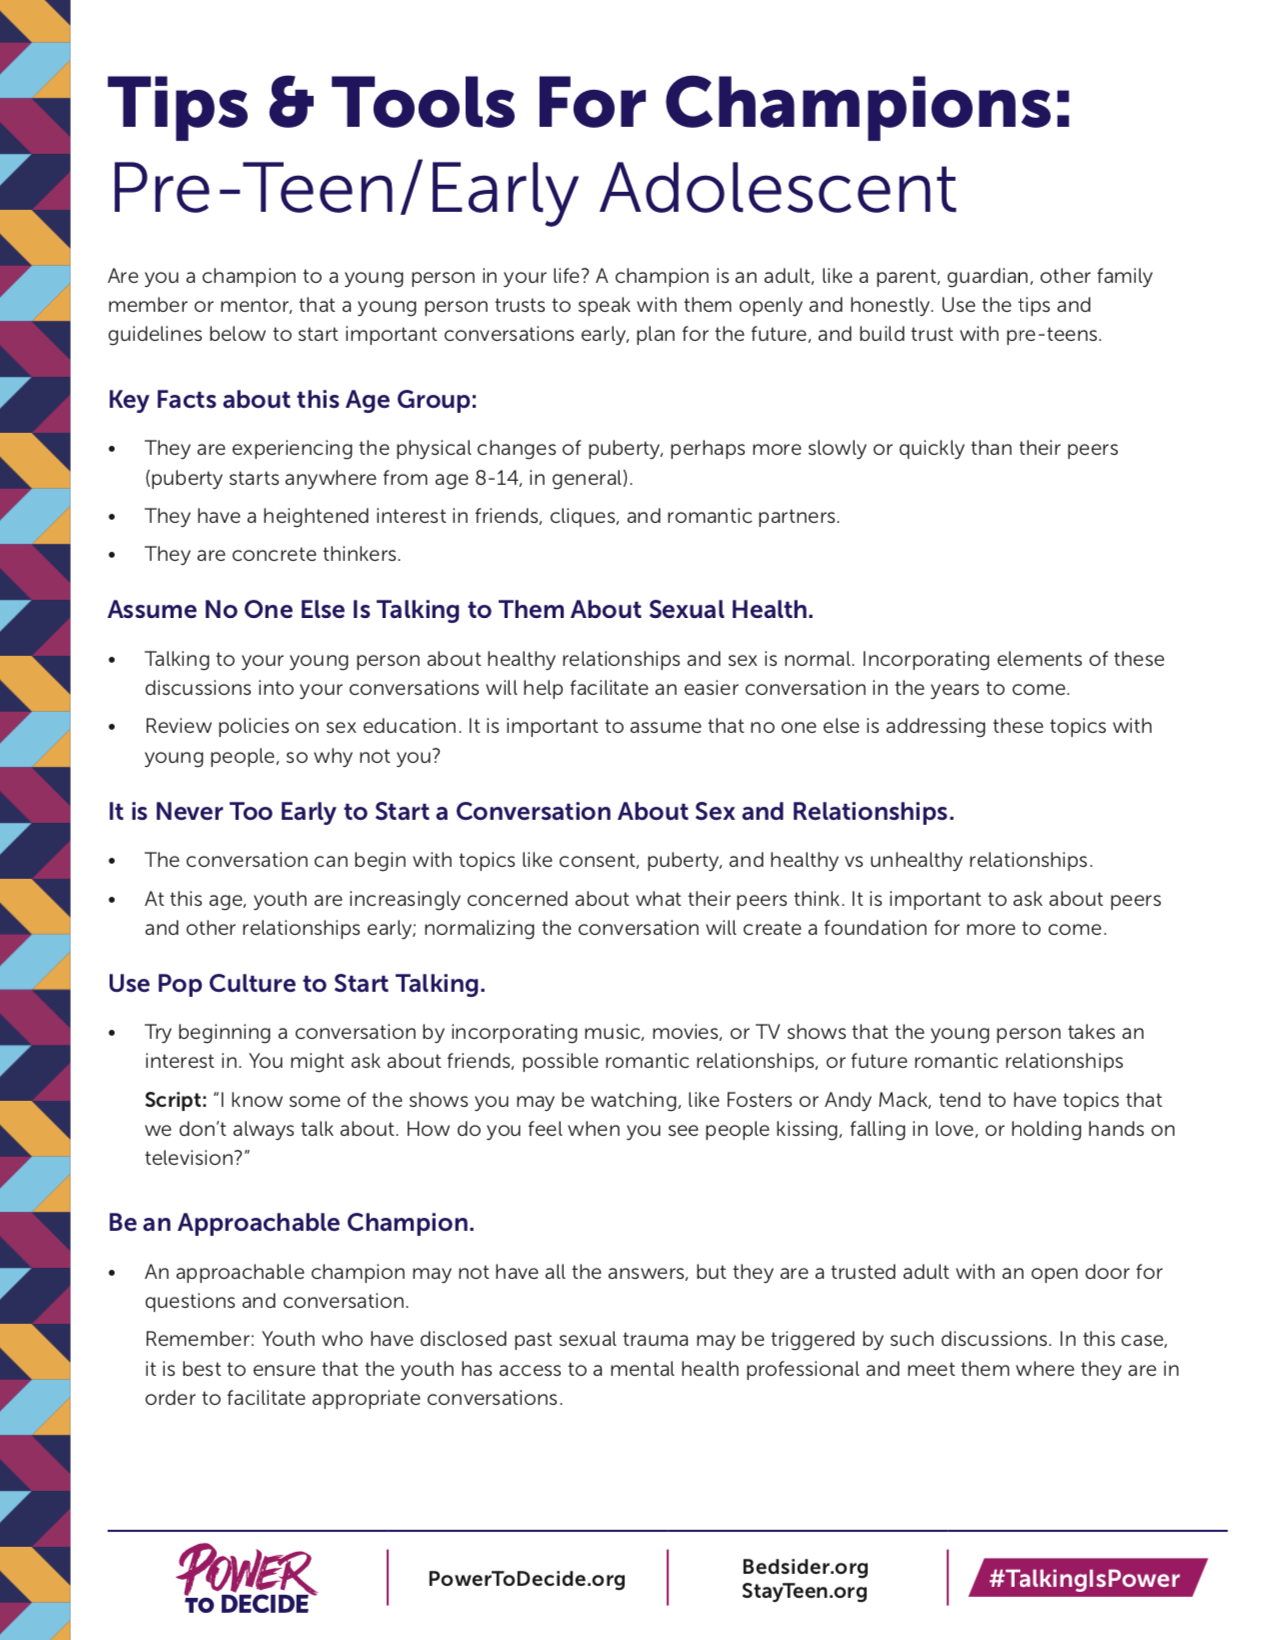 Tips & Tools For Trusted Adults: Pre-Teen/Early Adolescent